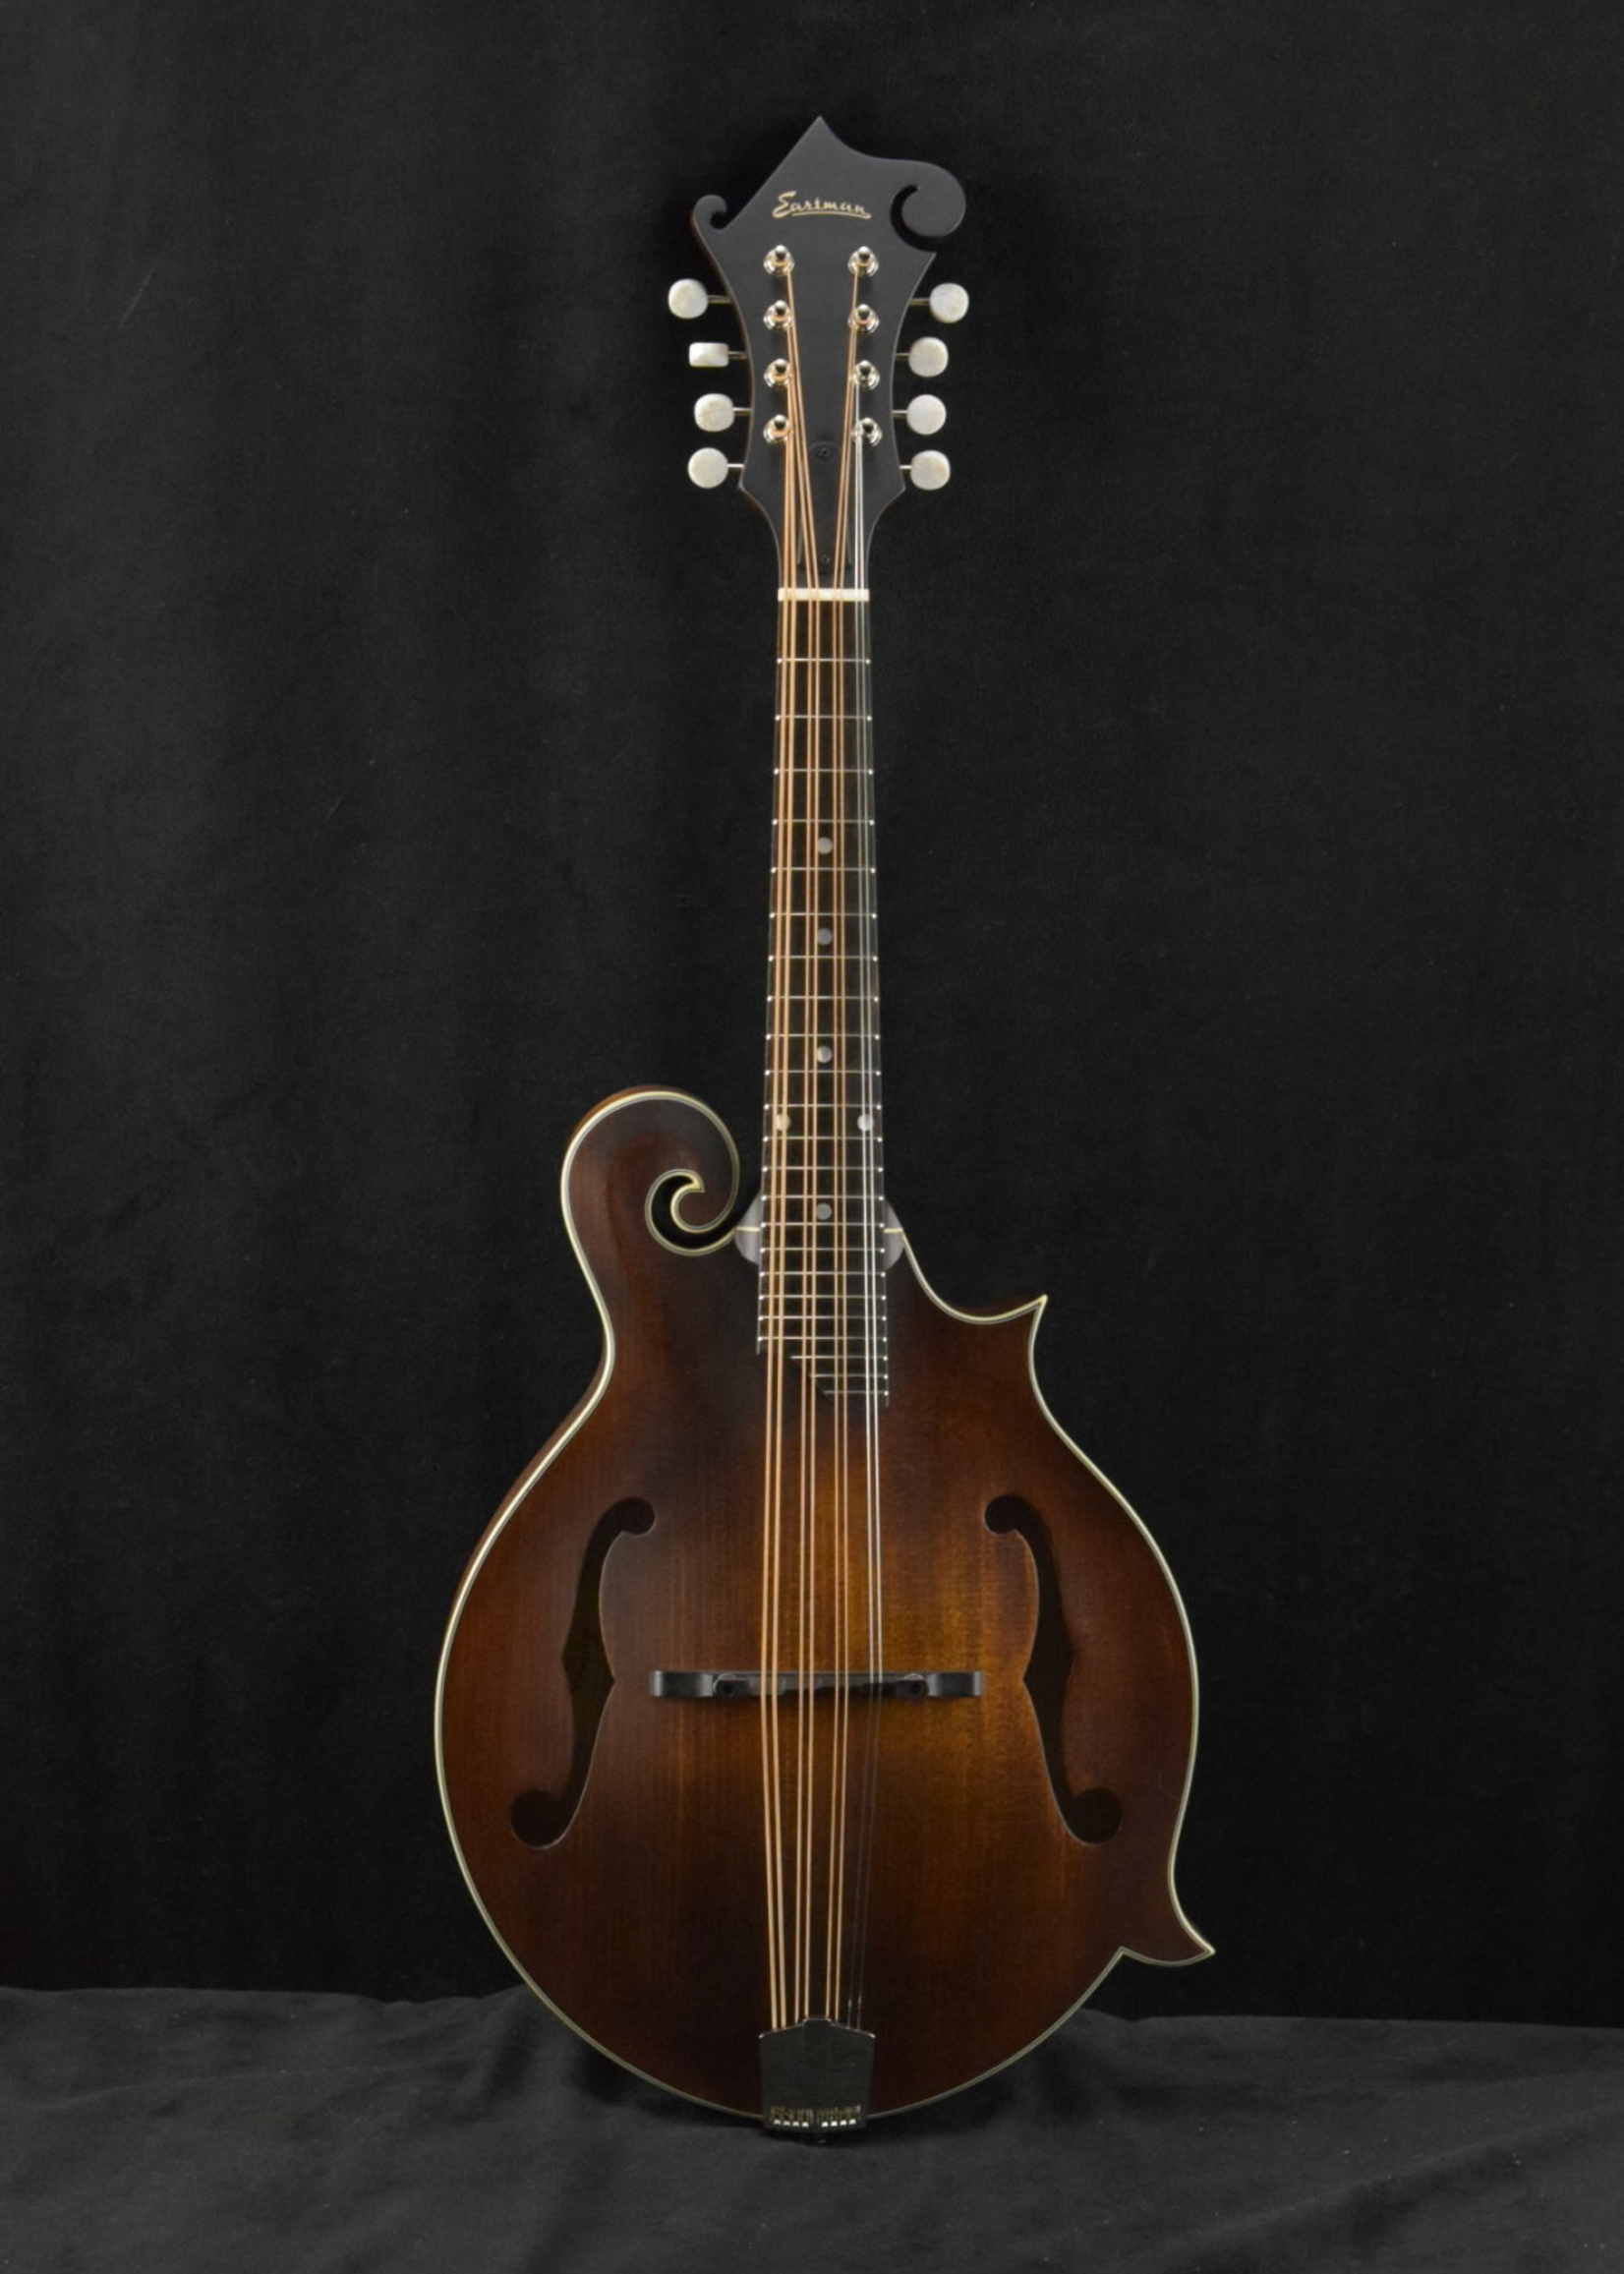 Mandola: The Lute Family, Generally Plucked With A Plectrum, Doubled Metal Strings Tuned In Unison, Eastman MDA315 F-Style F-Hole Classic Finish. 1660x2320 HD Background.